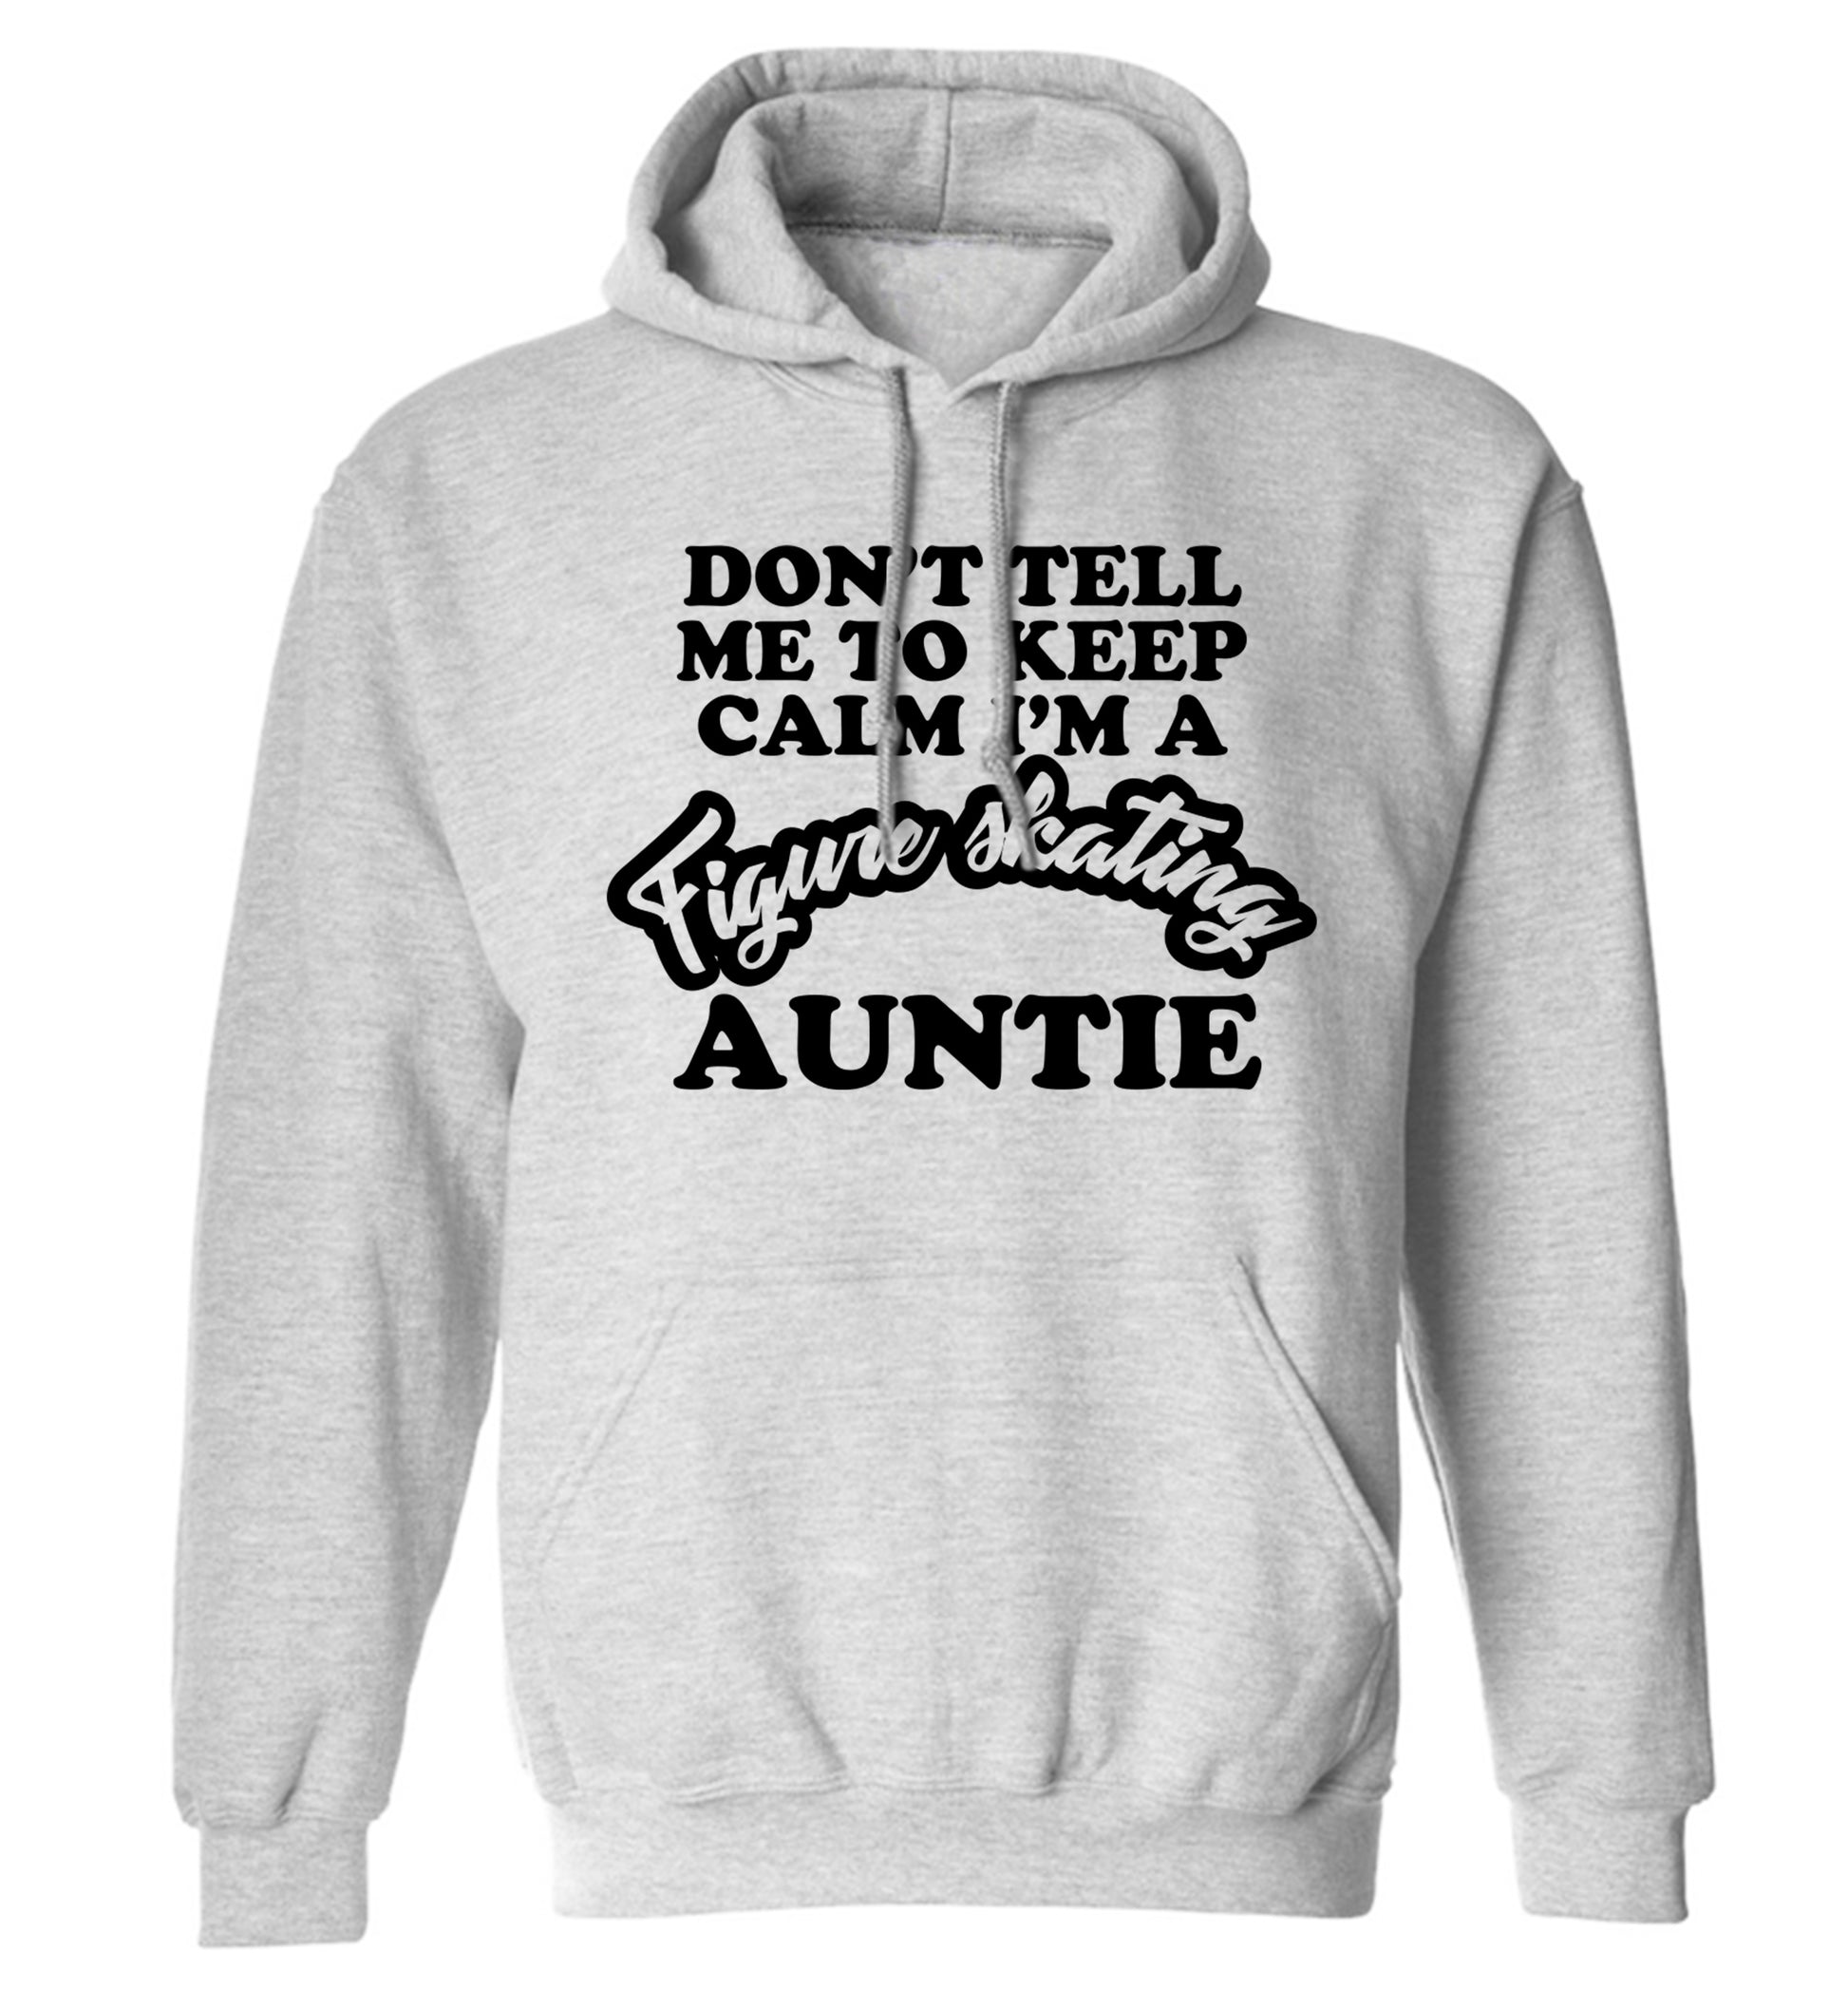 Don't tell me to keep calm I'm a figure skating auntie adults unisexgrey hoodie 2XL